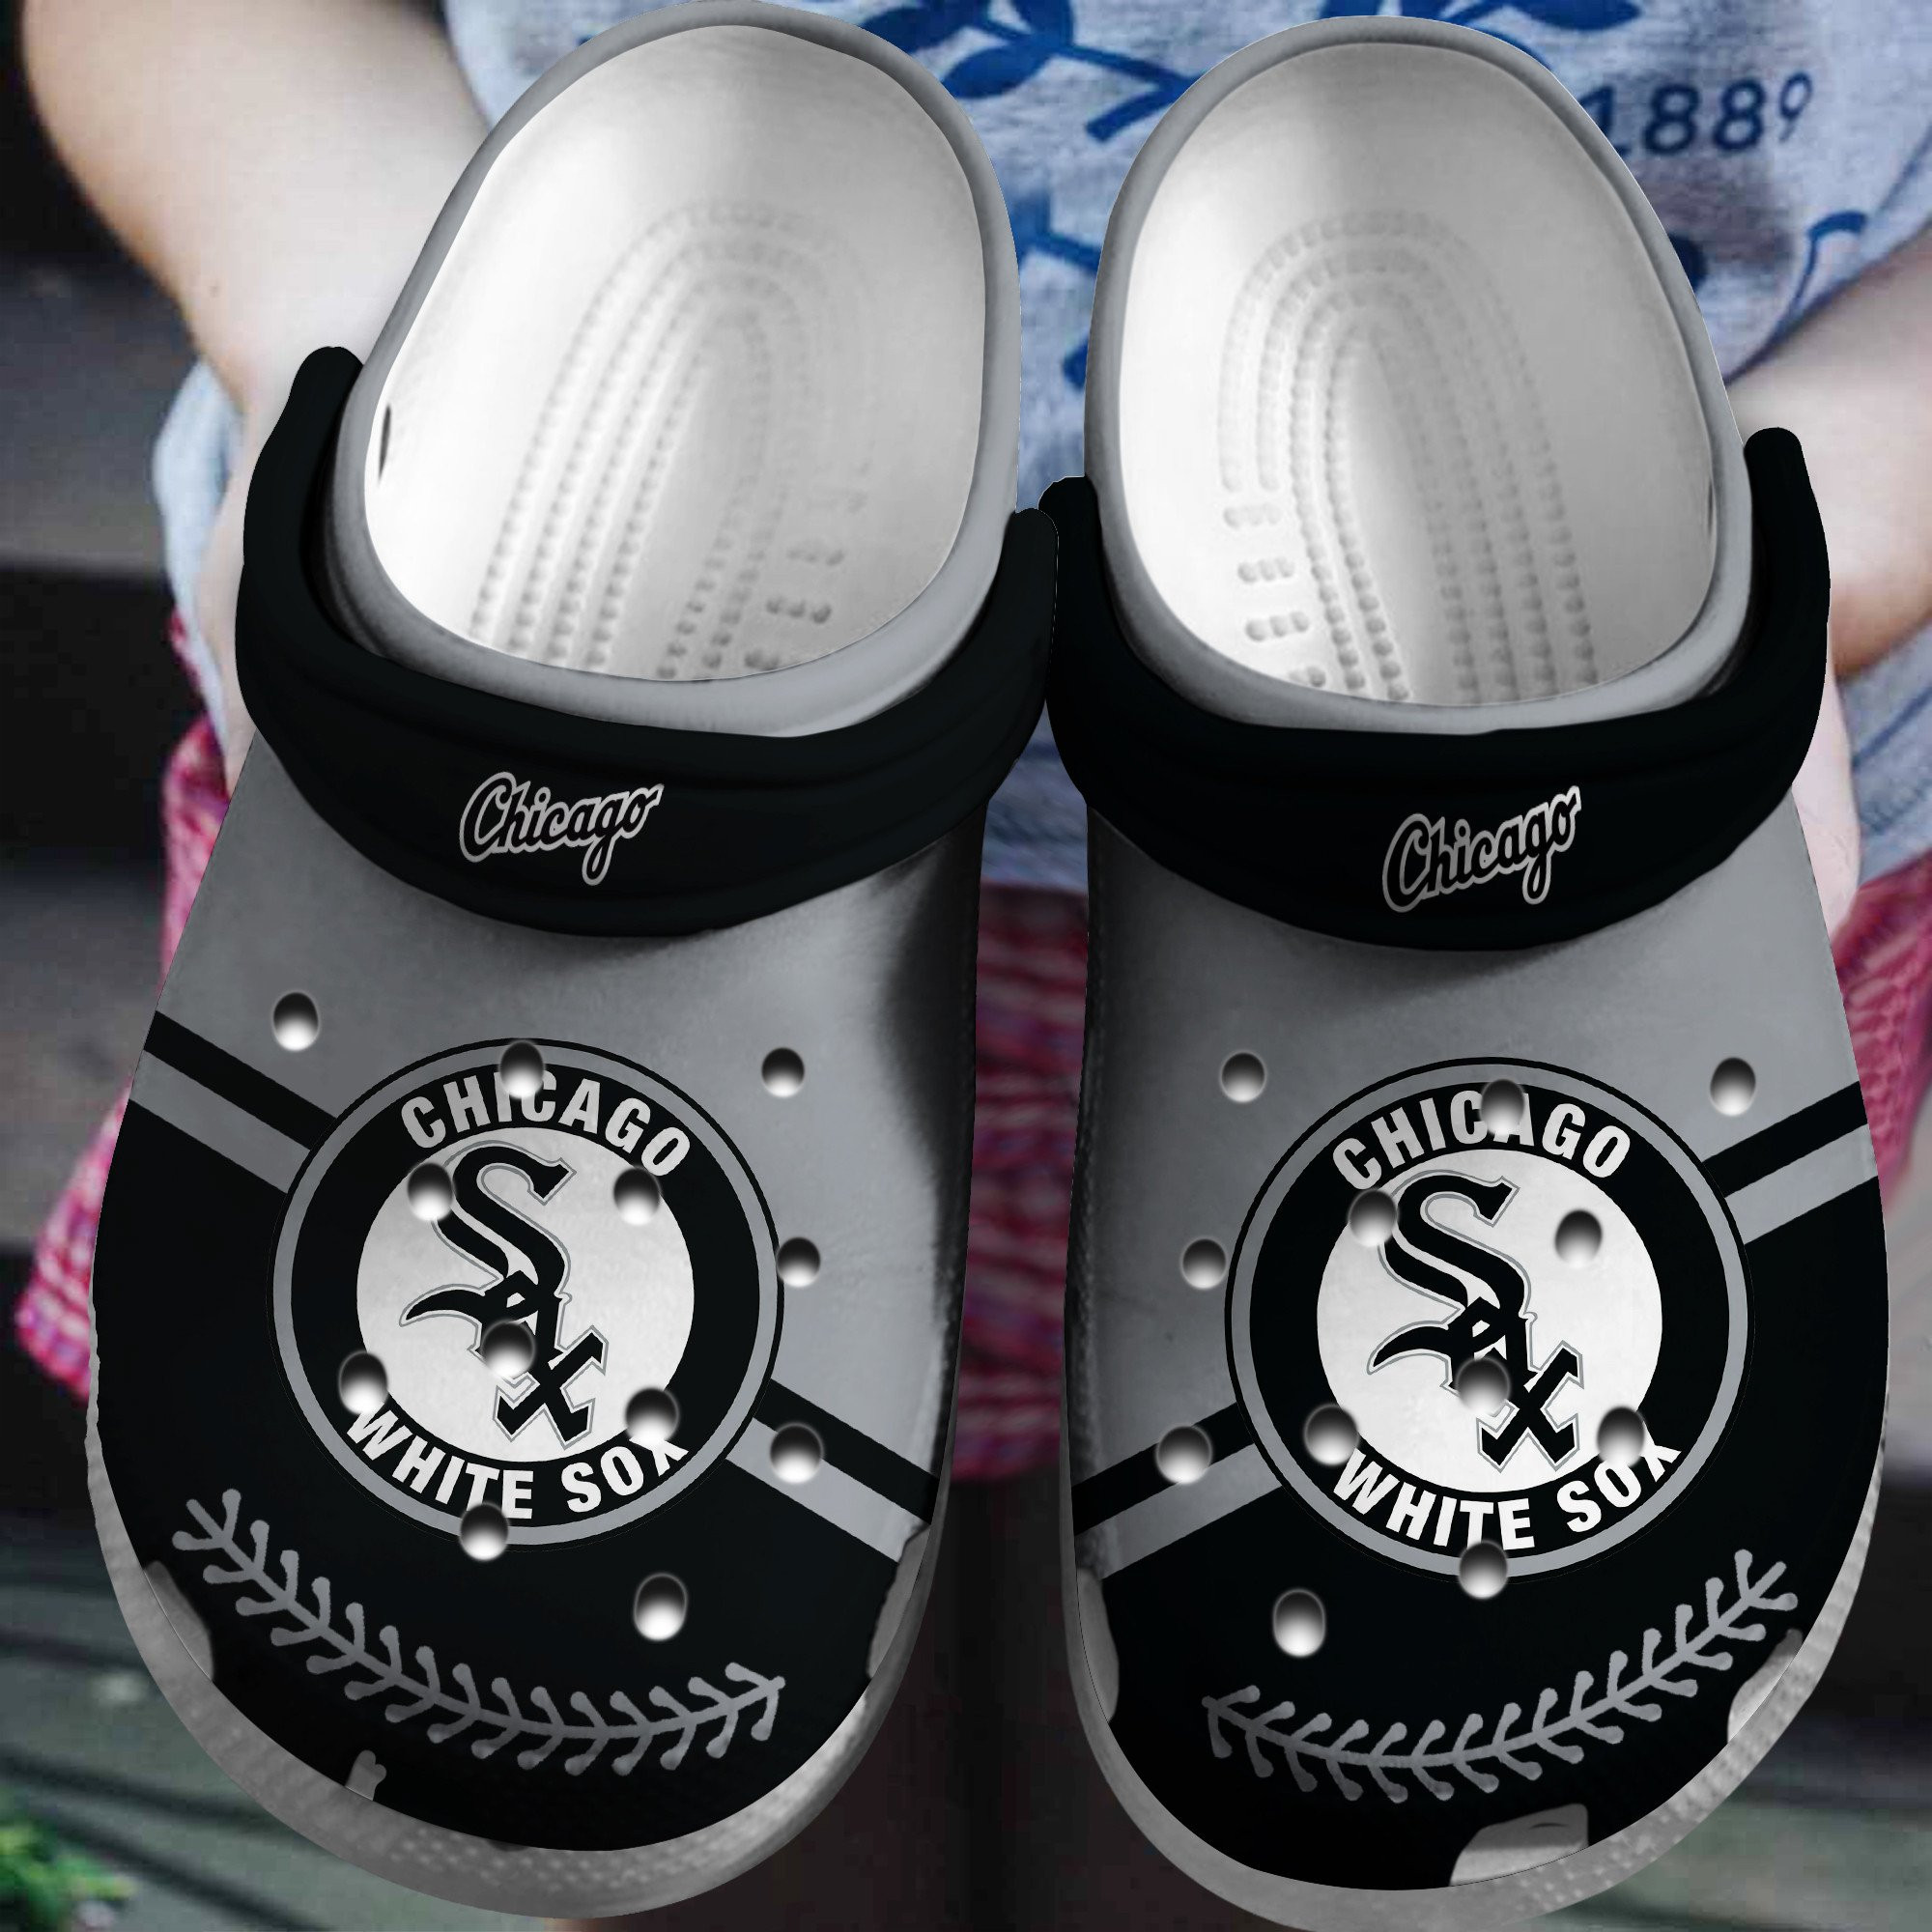 Hot Mlb Team Chicago White Sox Grey-Black Crocs Clog Shoesshoes Trusted Shopping Online In The World